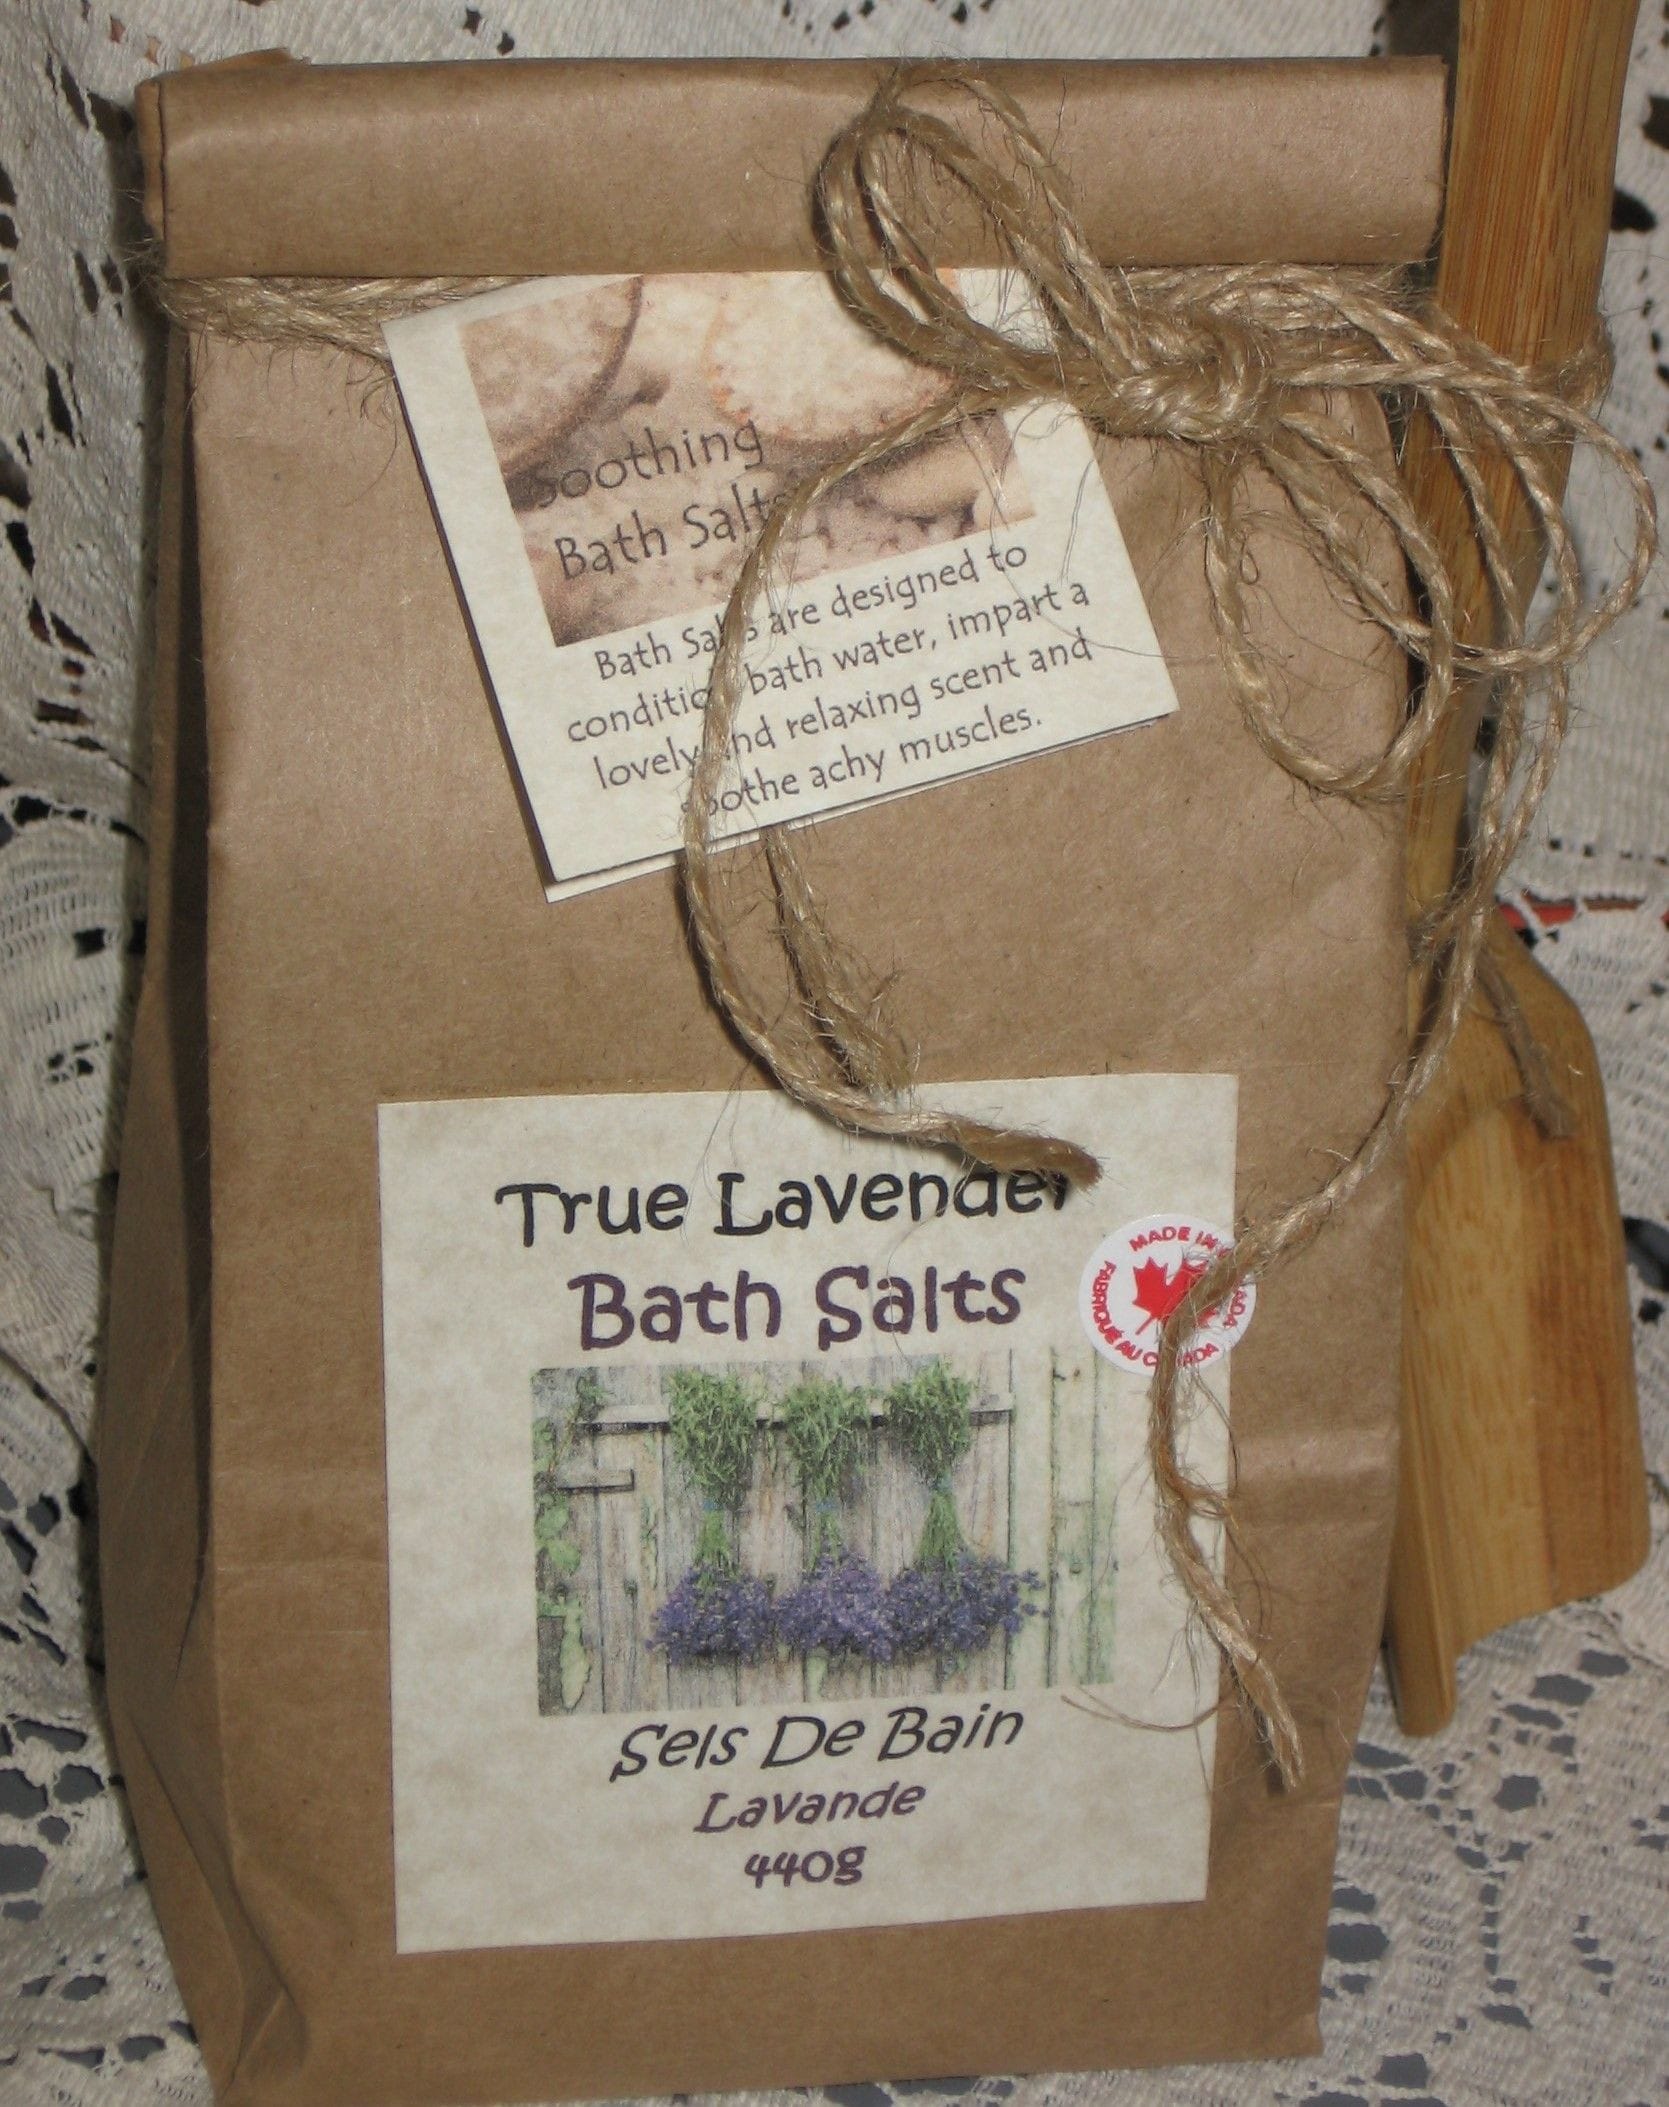 Soothing Bath Salts are a wonderful compliment to our all natural handmade soaps.  Relax and soak away achy muscles.  Vegan